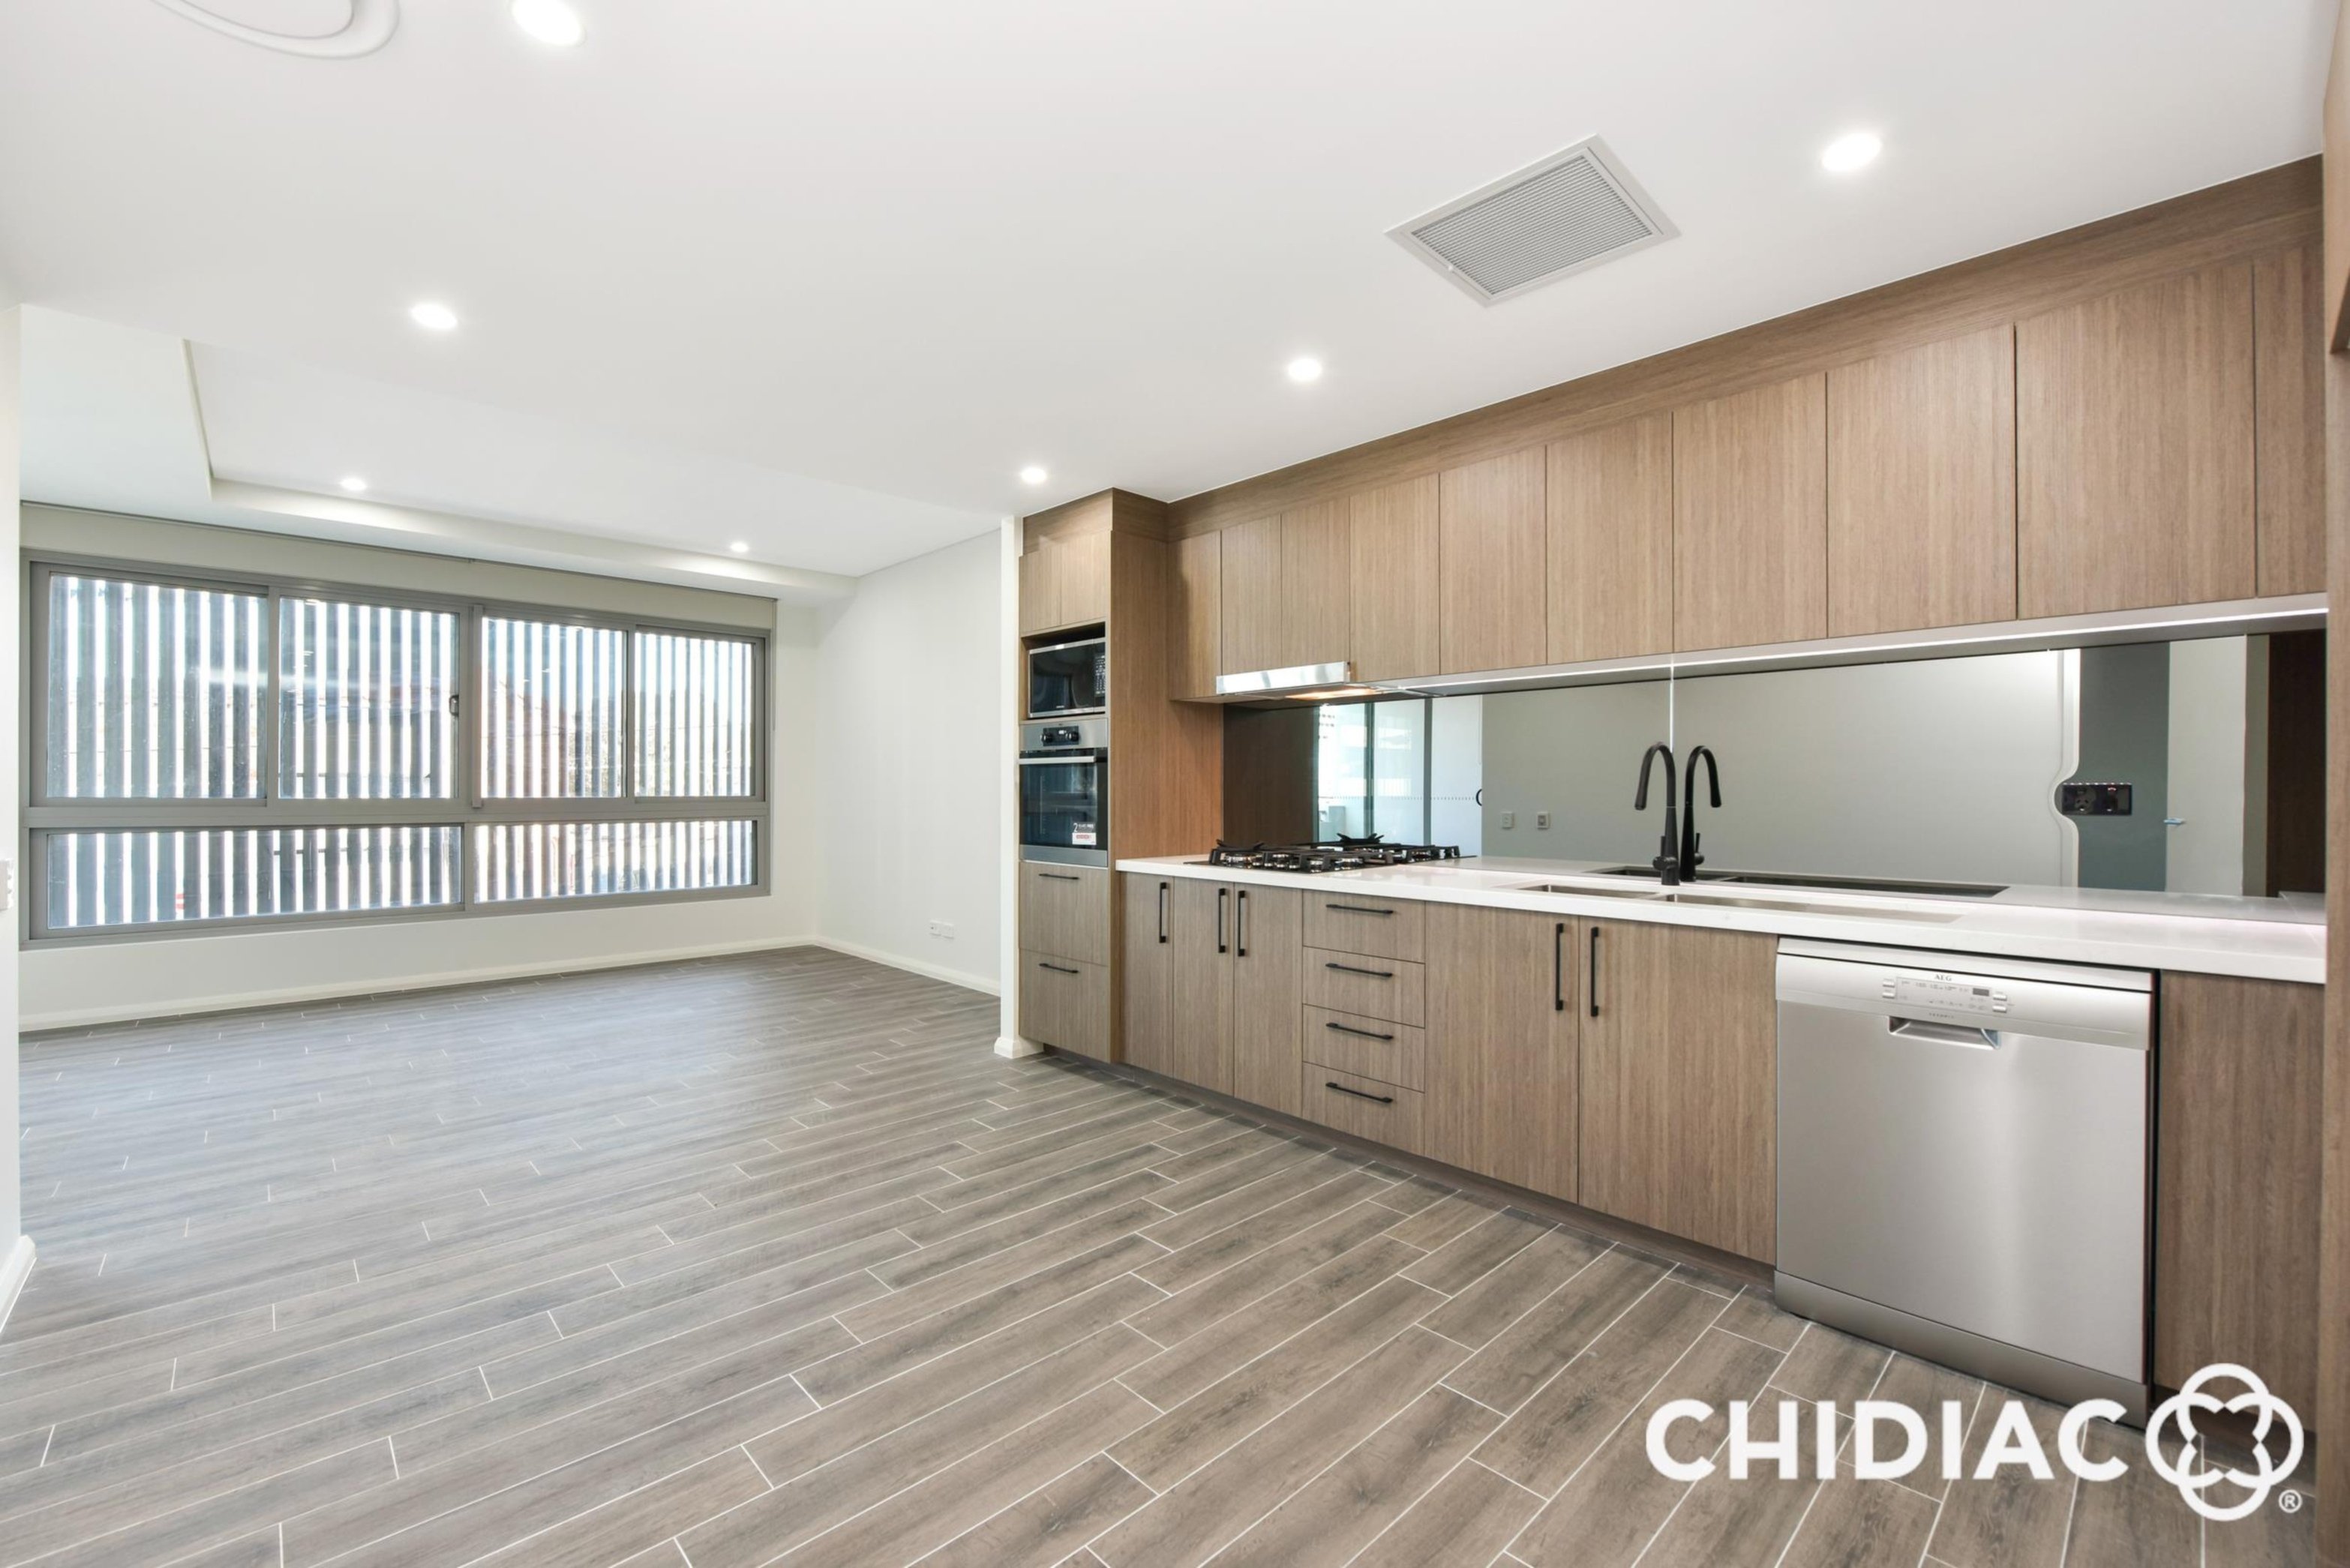 A20X/843 New Canterbury Road, Canterbury Leased by Chidiac Realty - image 3